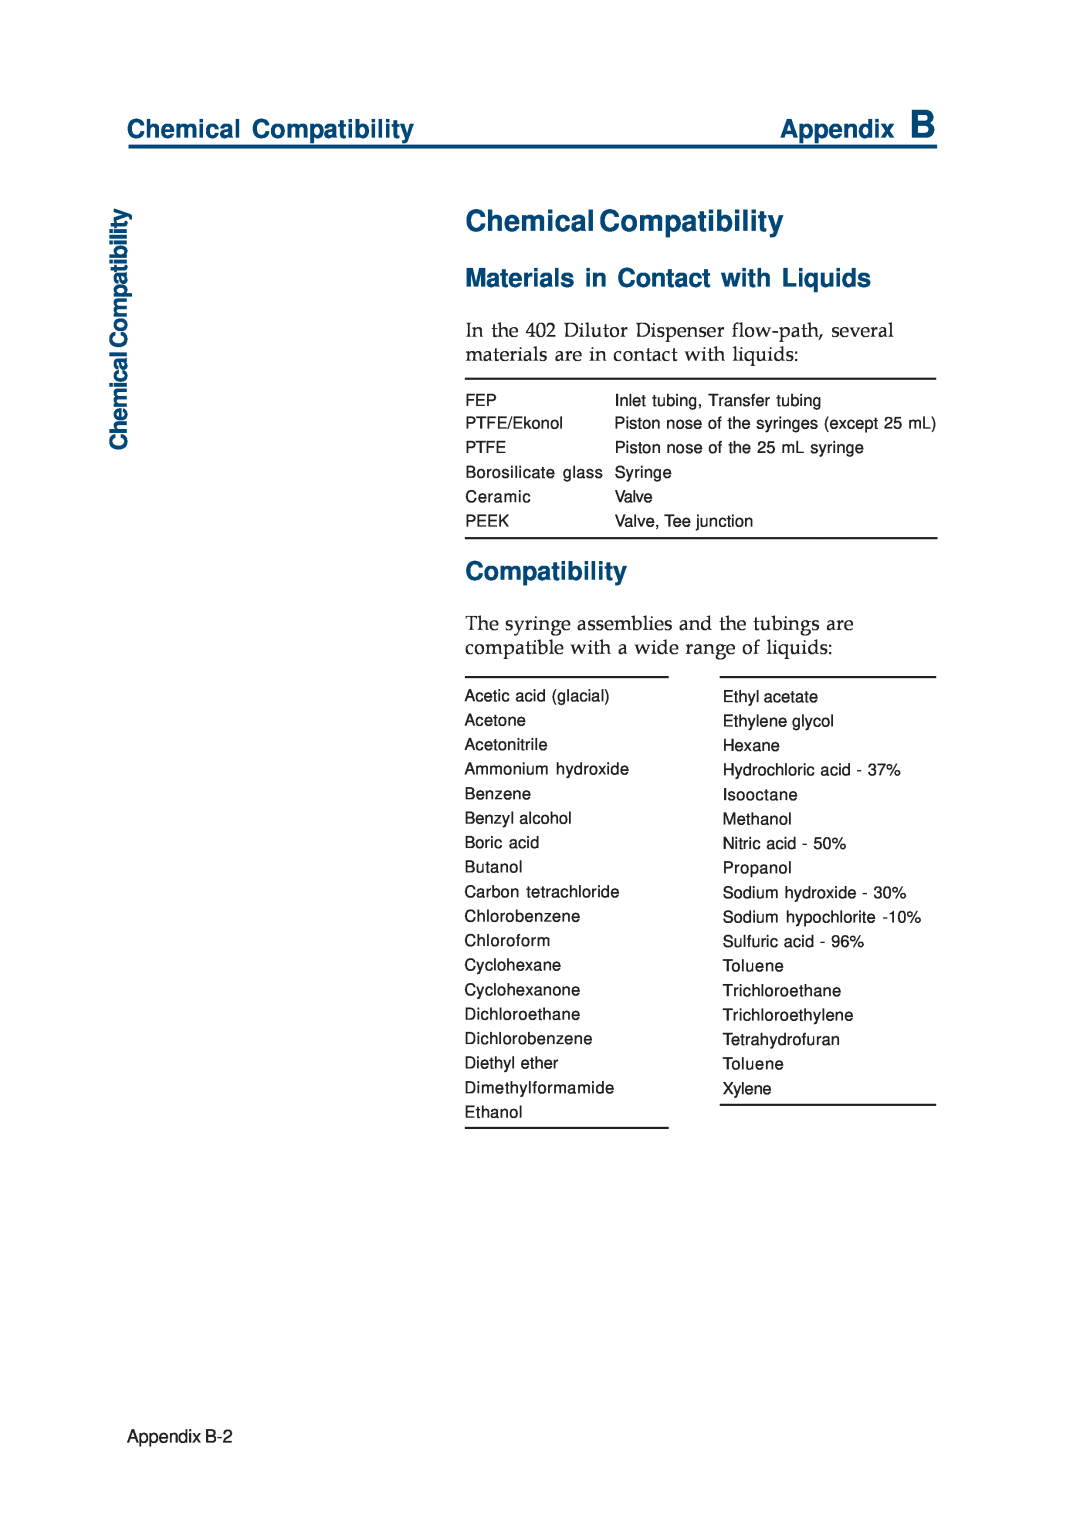 Gilson 402 manual Chemical Compatibility, Appendix B, Materials in Contact with Liquids 